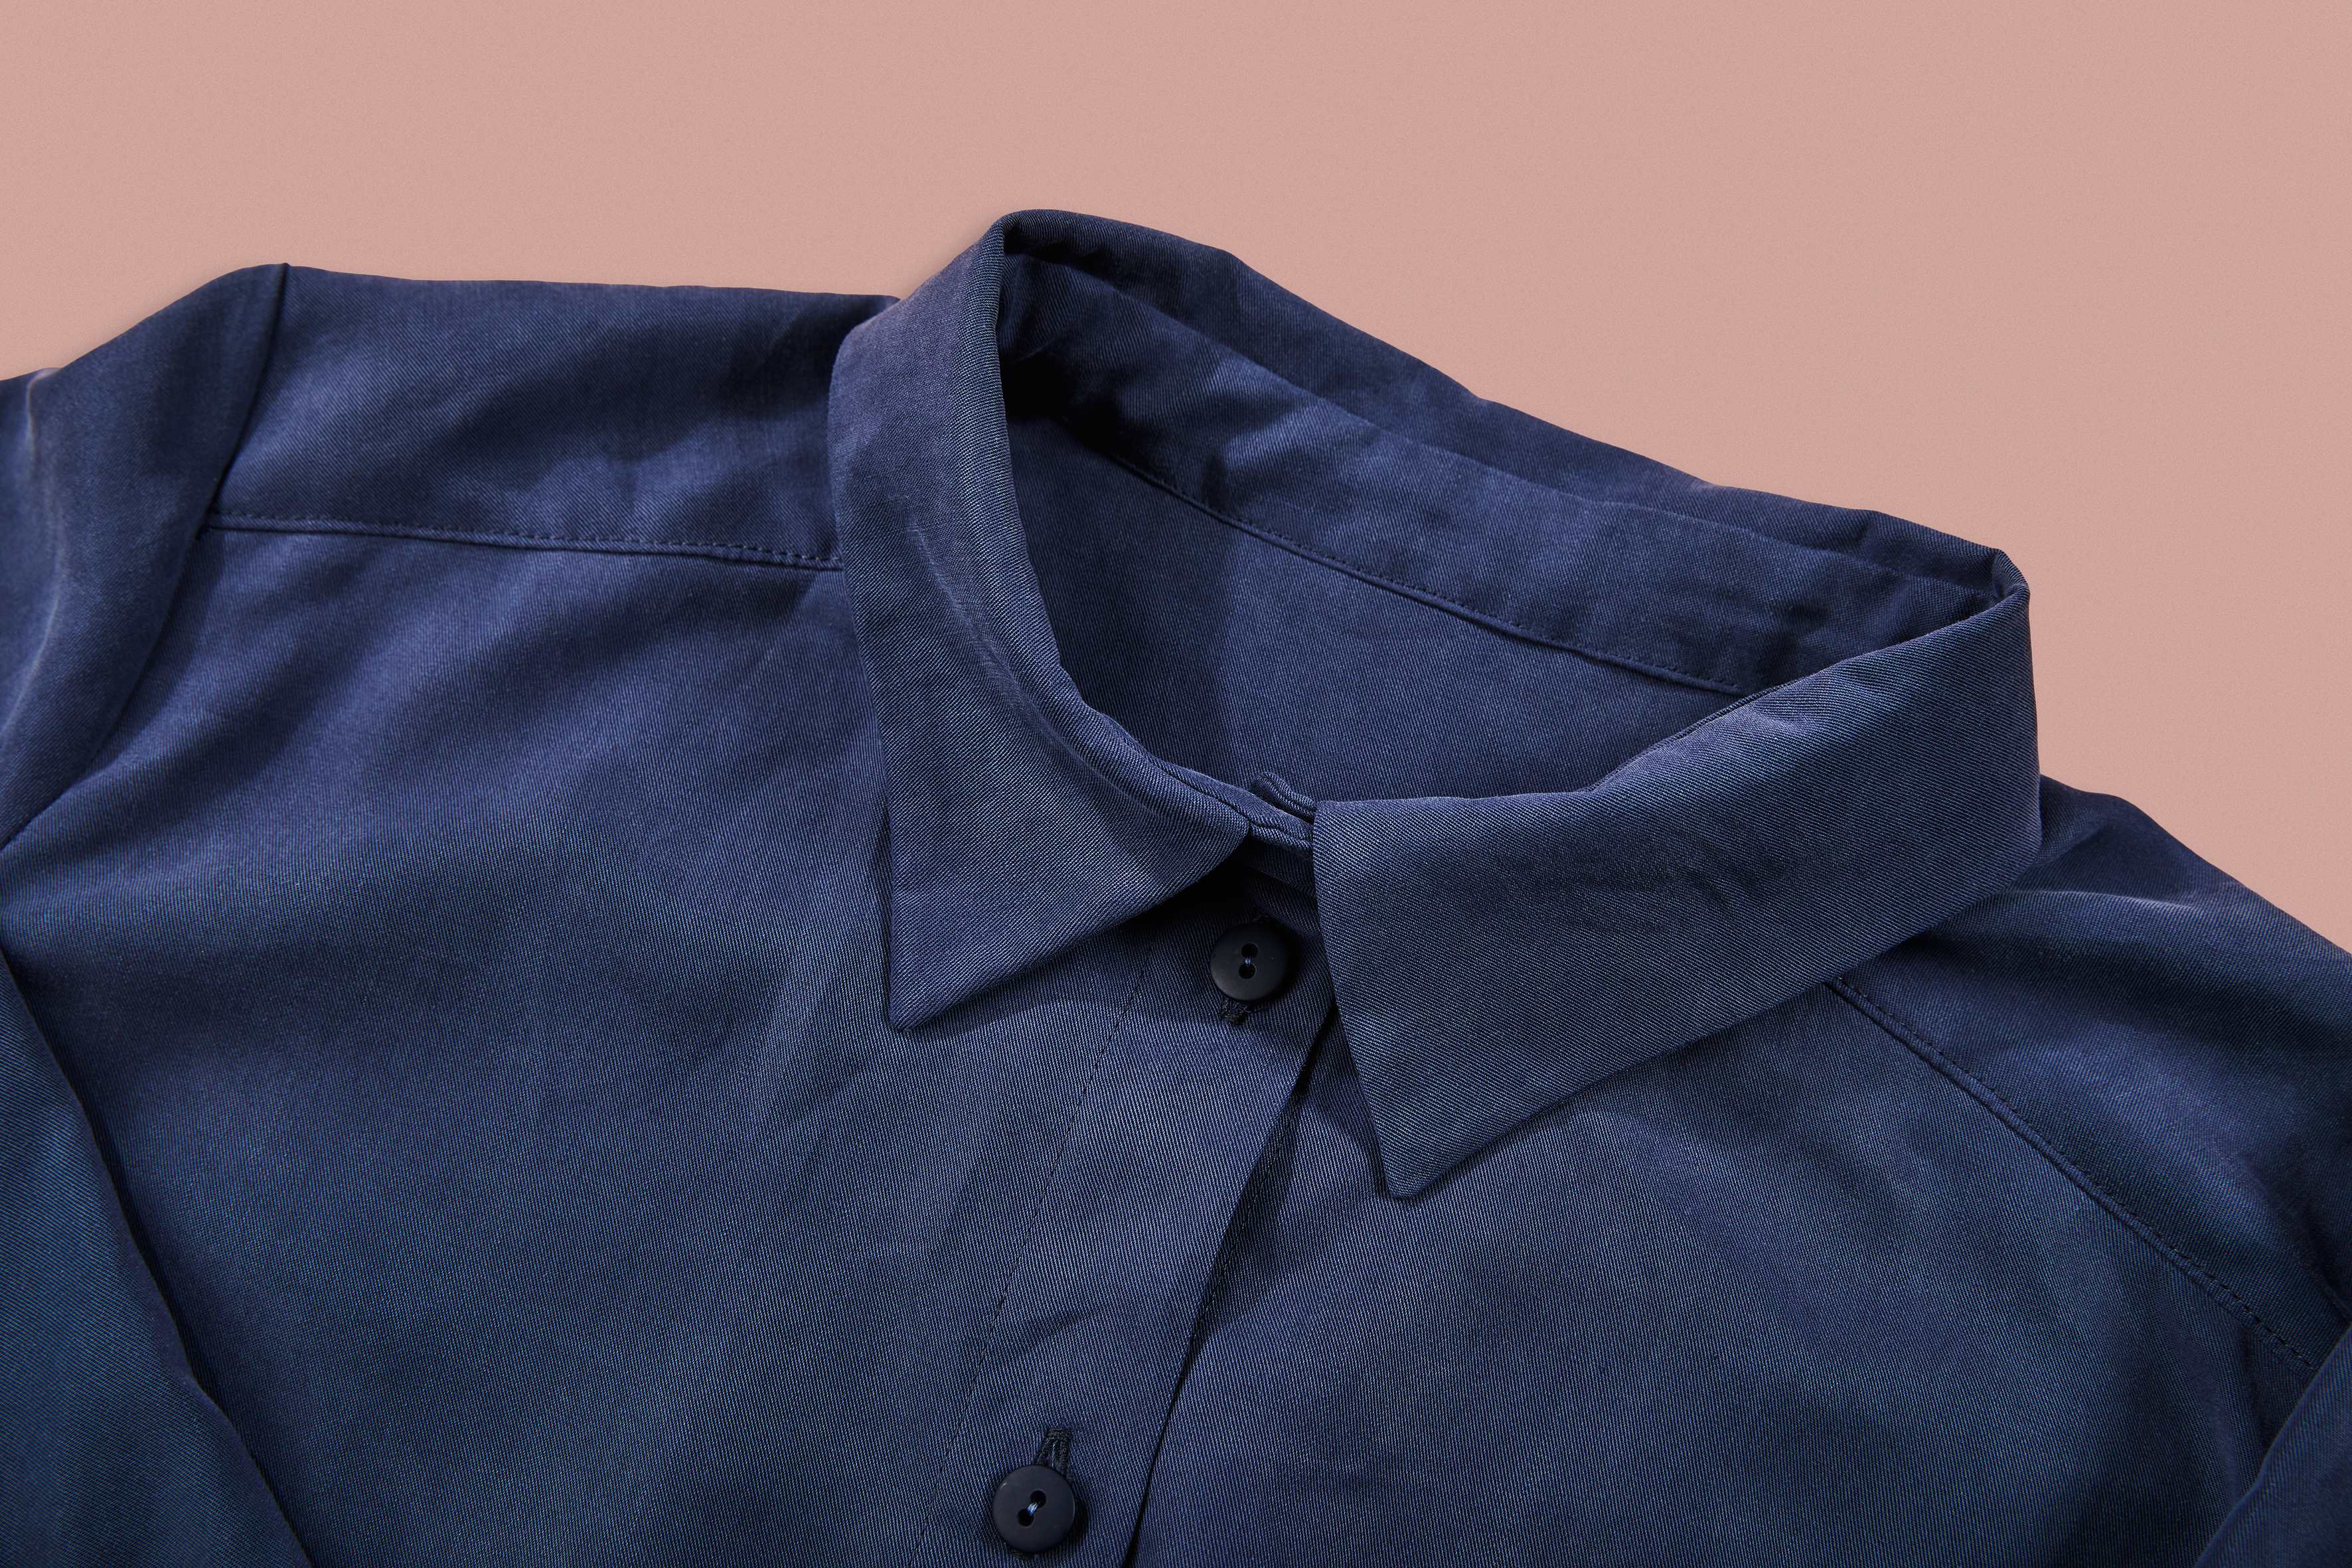 detailed view of collar of blue blouse